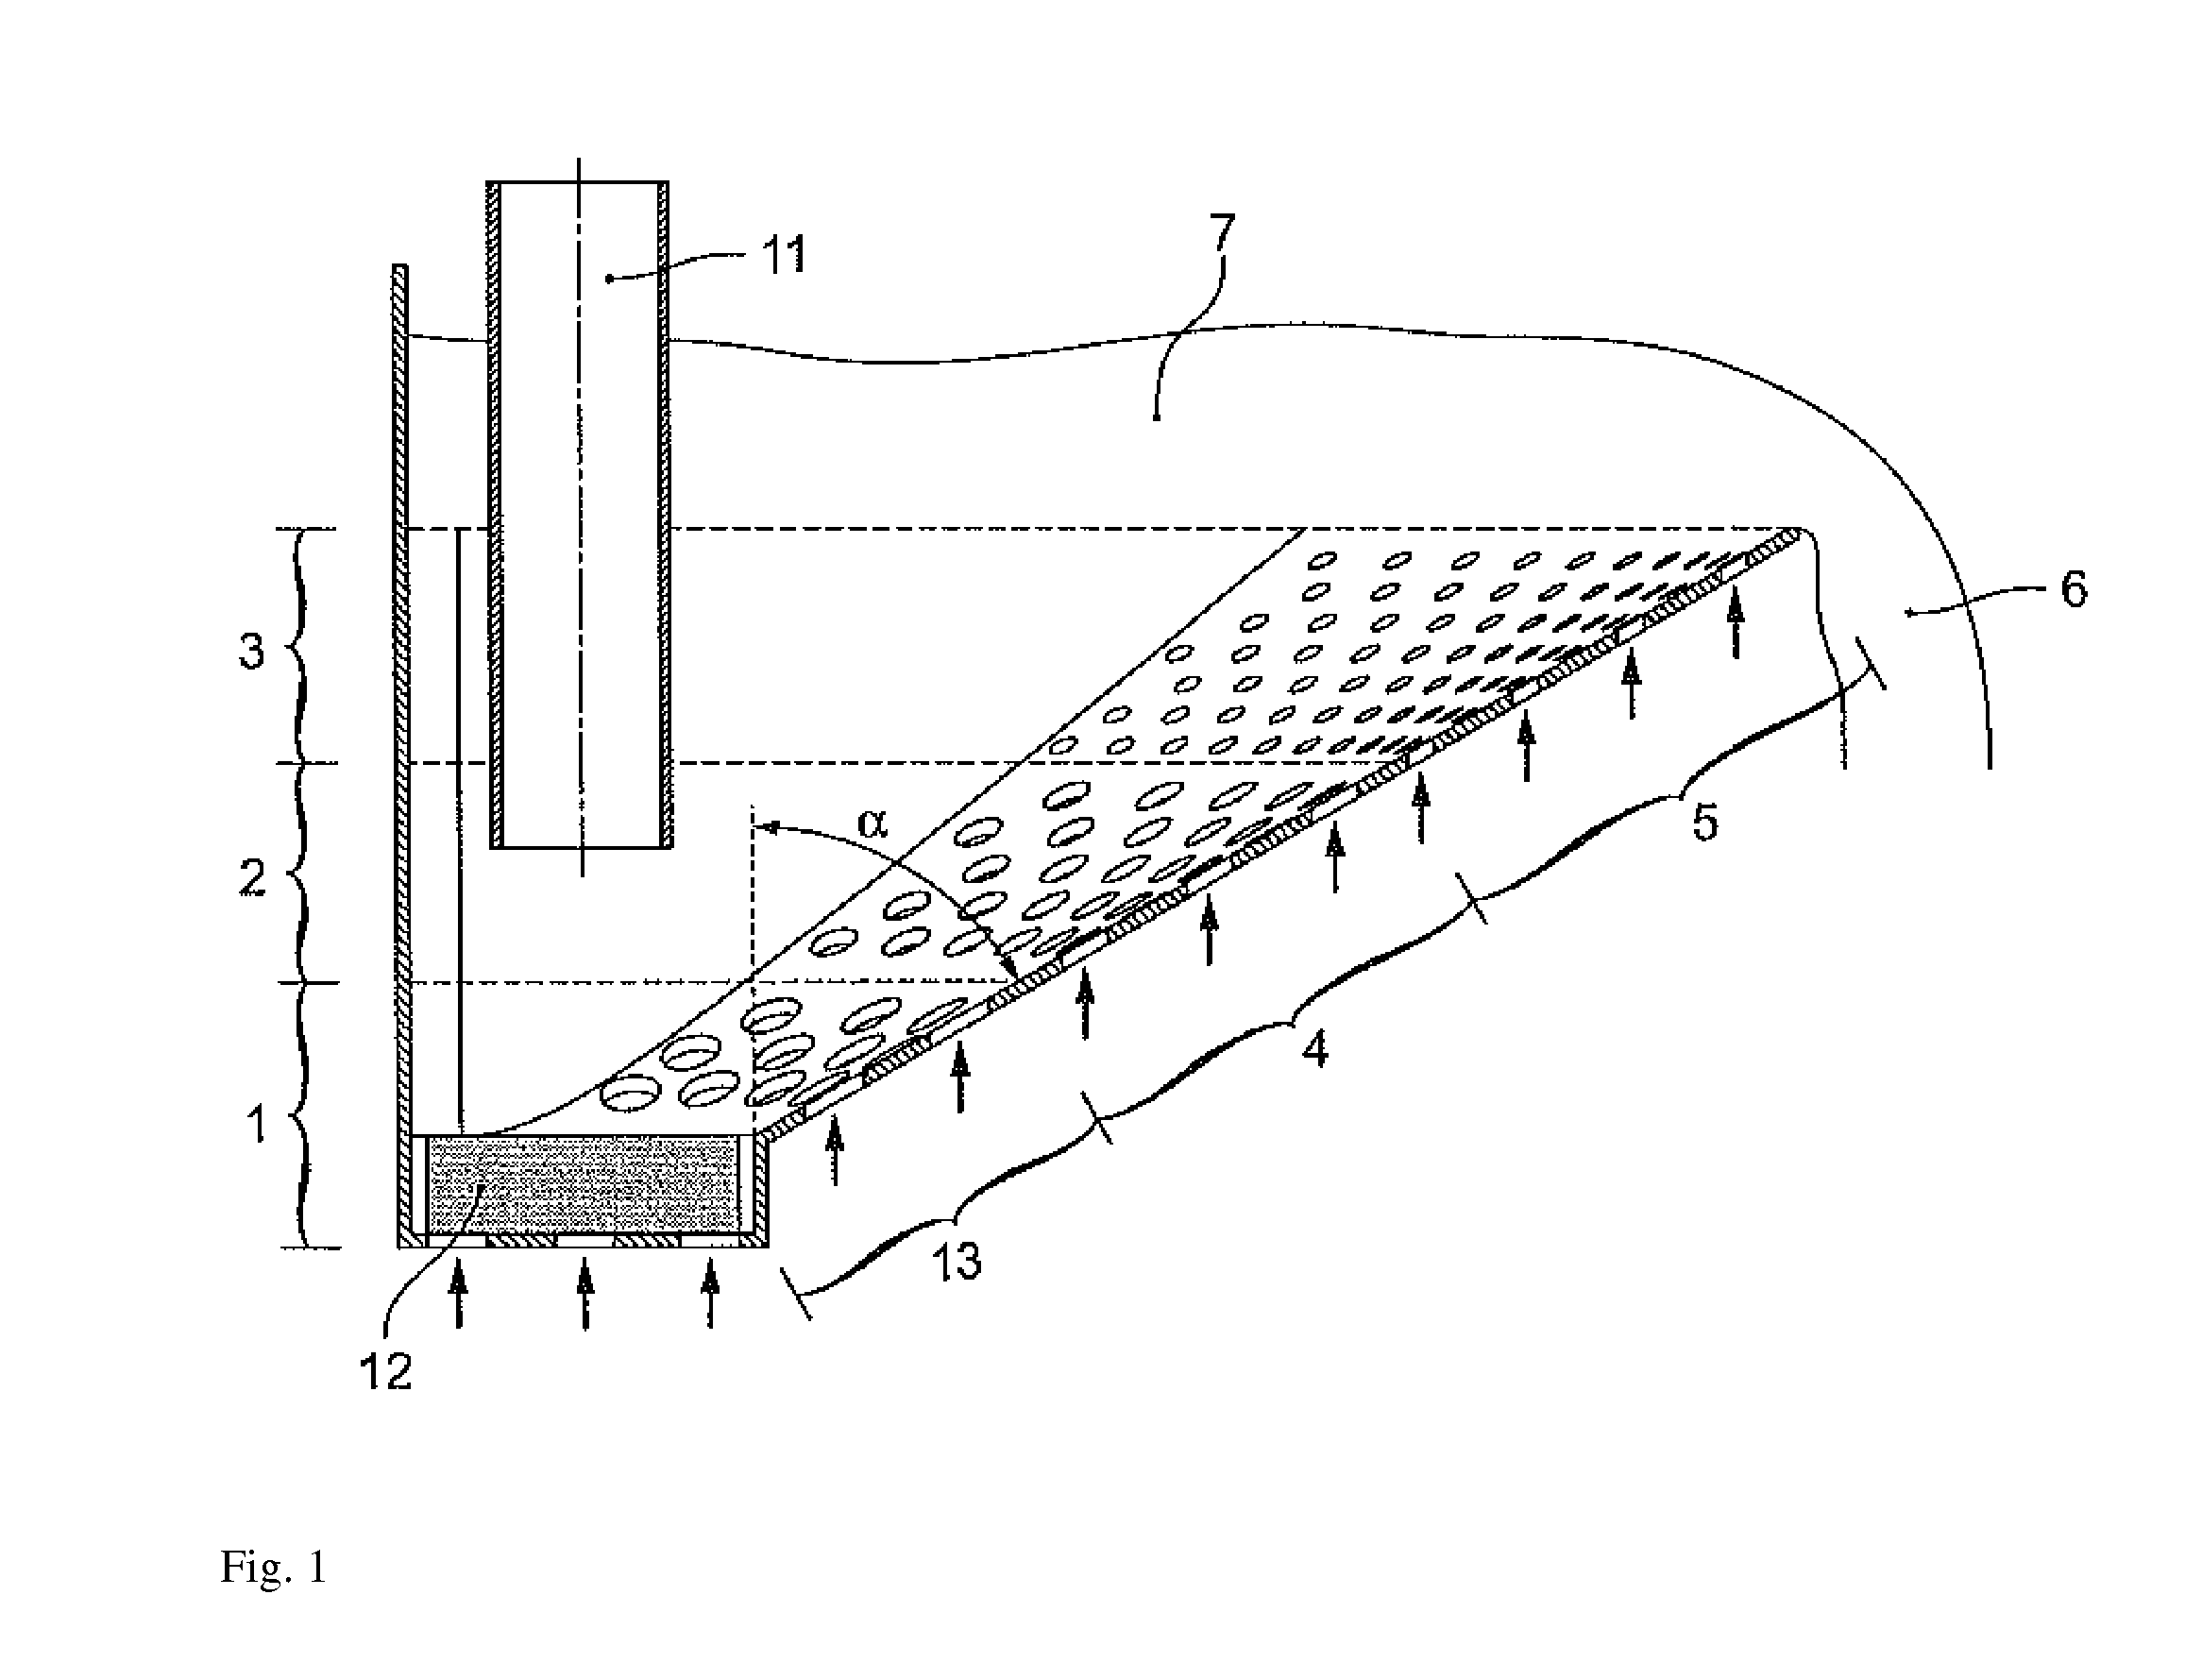 Process and device for fluidized bed torrefaction and grinding of a biomass feed for subsequent gasification or combustion